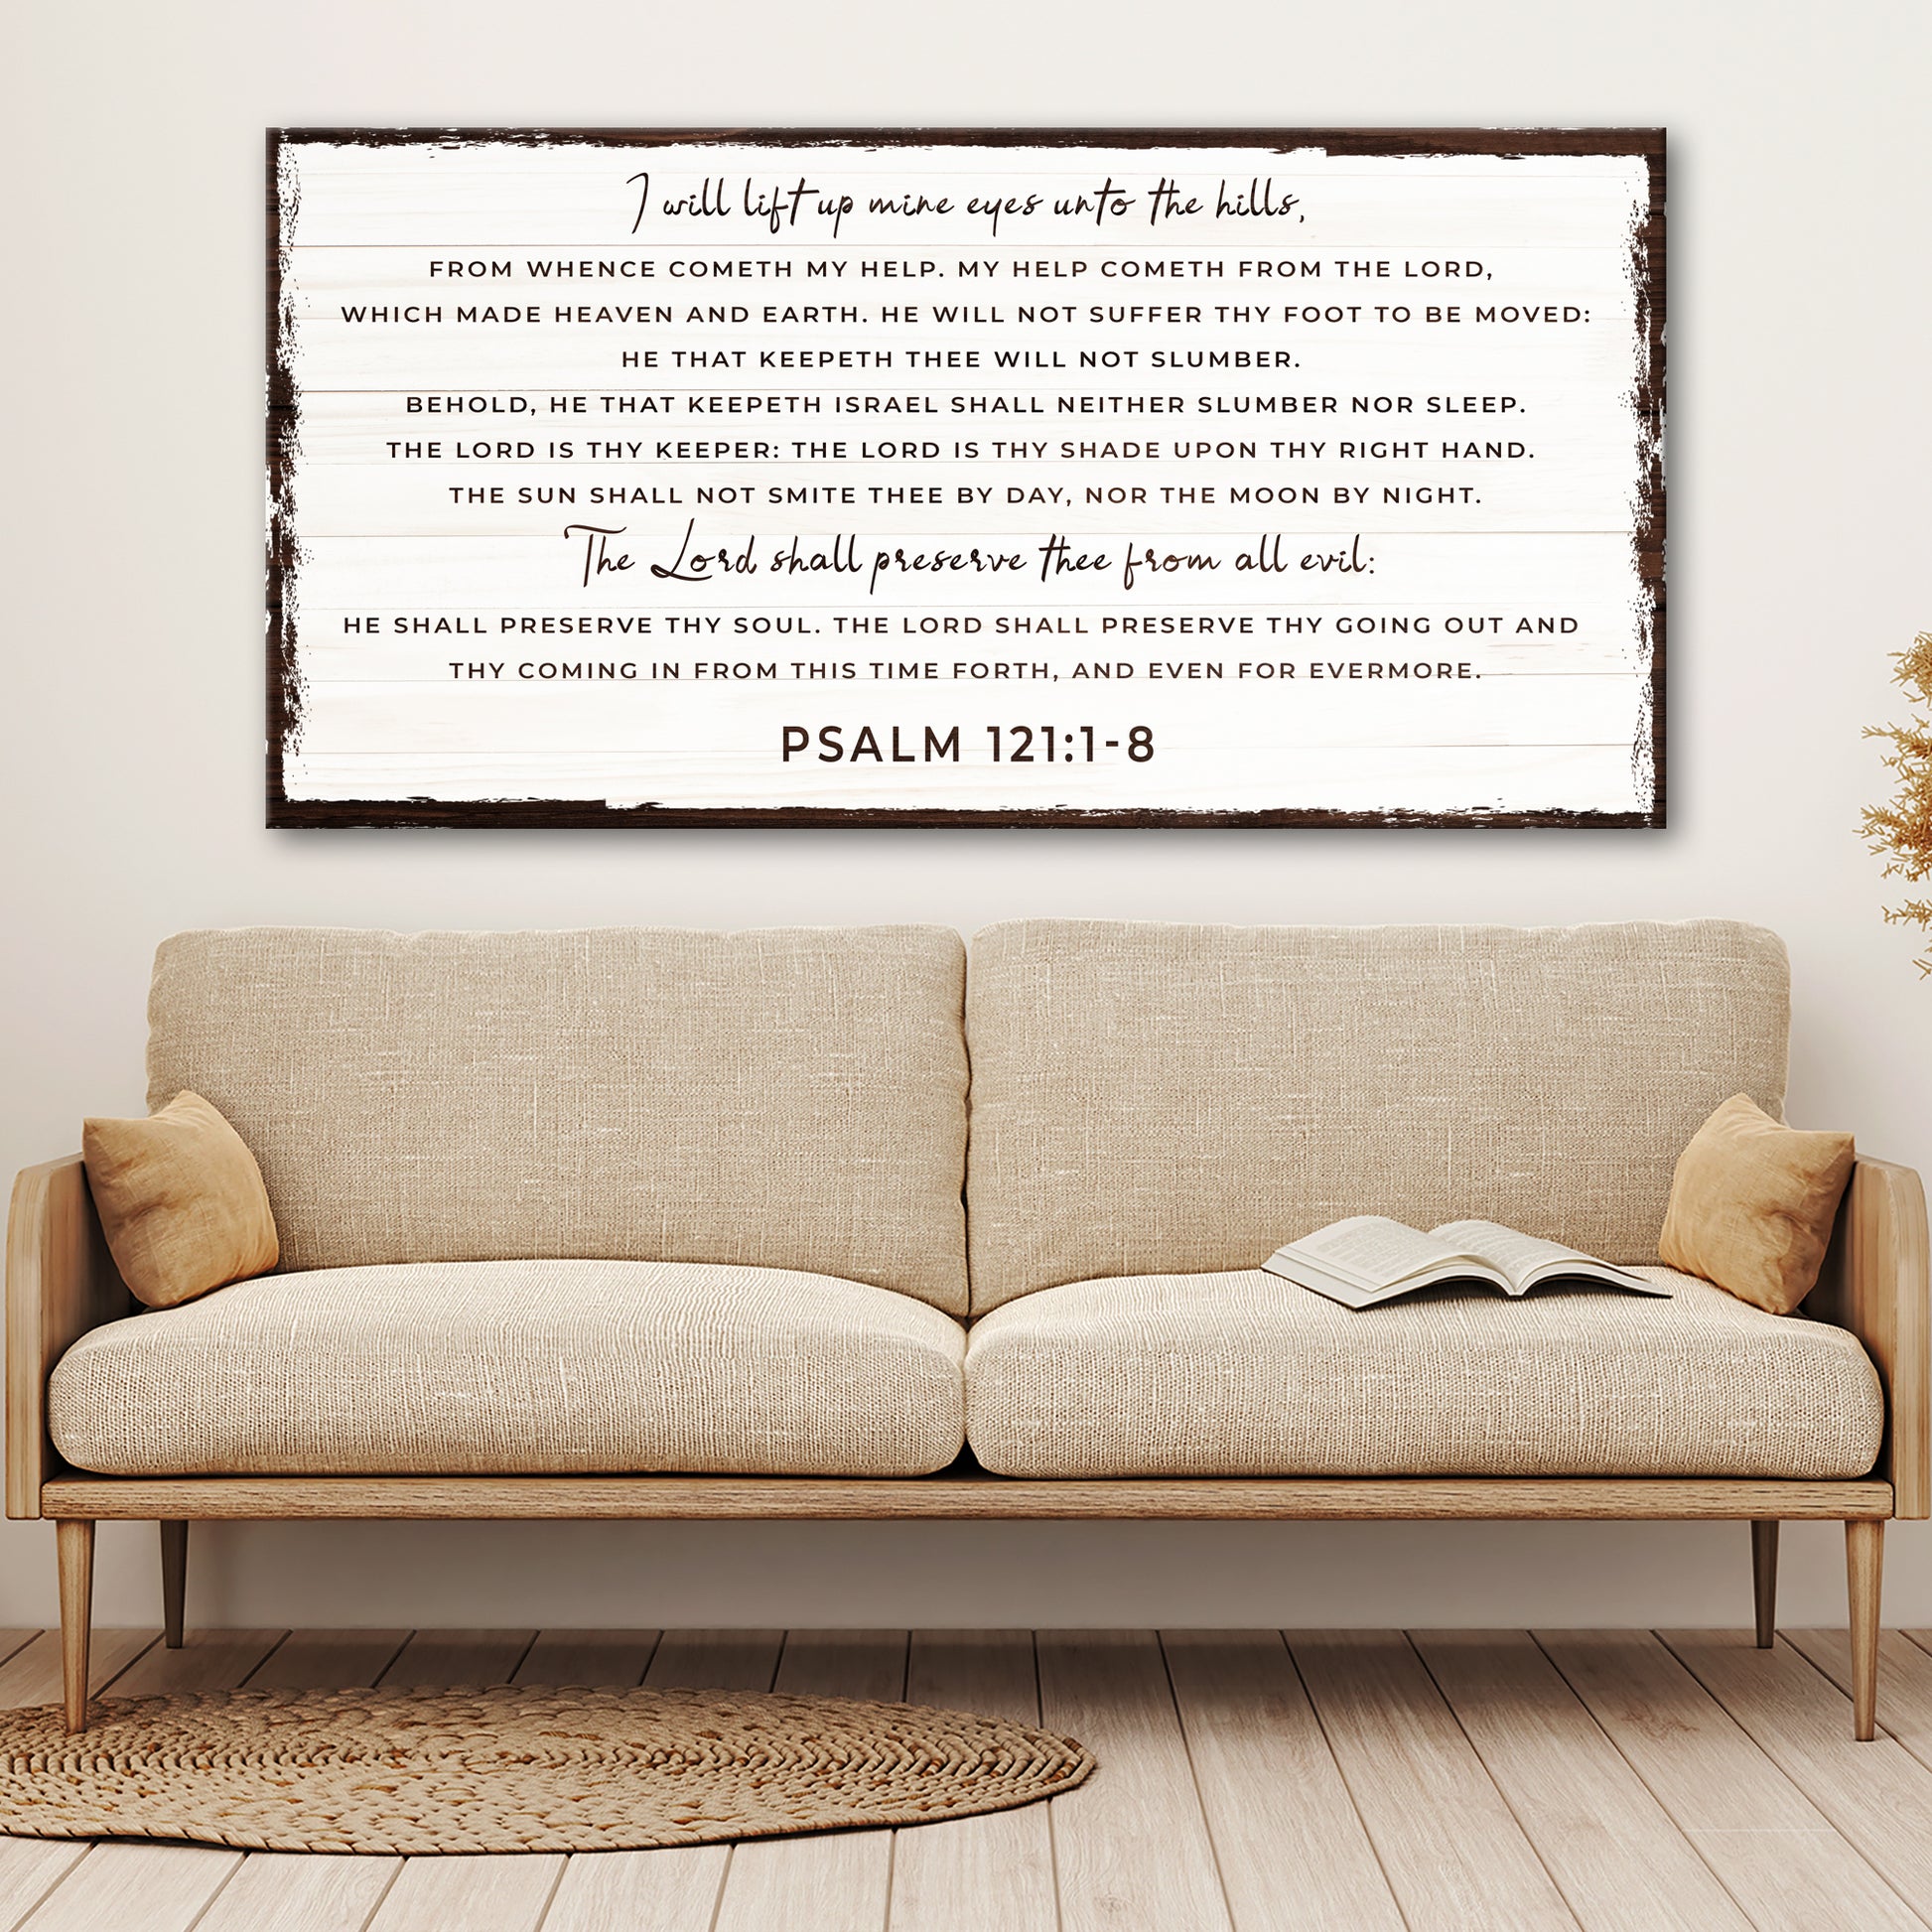 Psalm 121:1-8 - My Help Comes From The Lord Sign - Image by Tailored Canvases